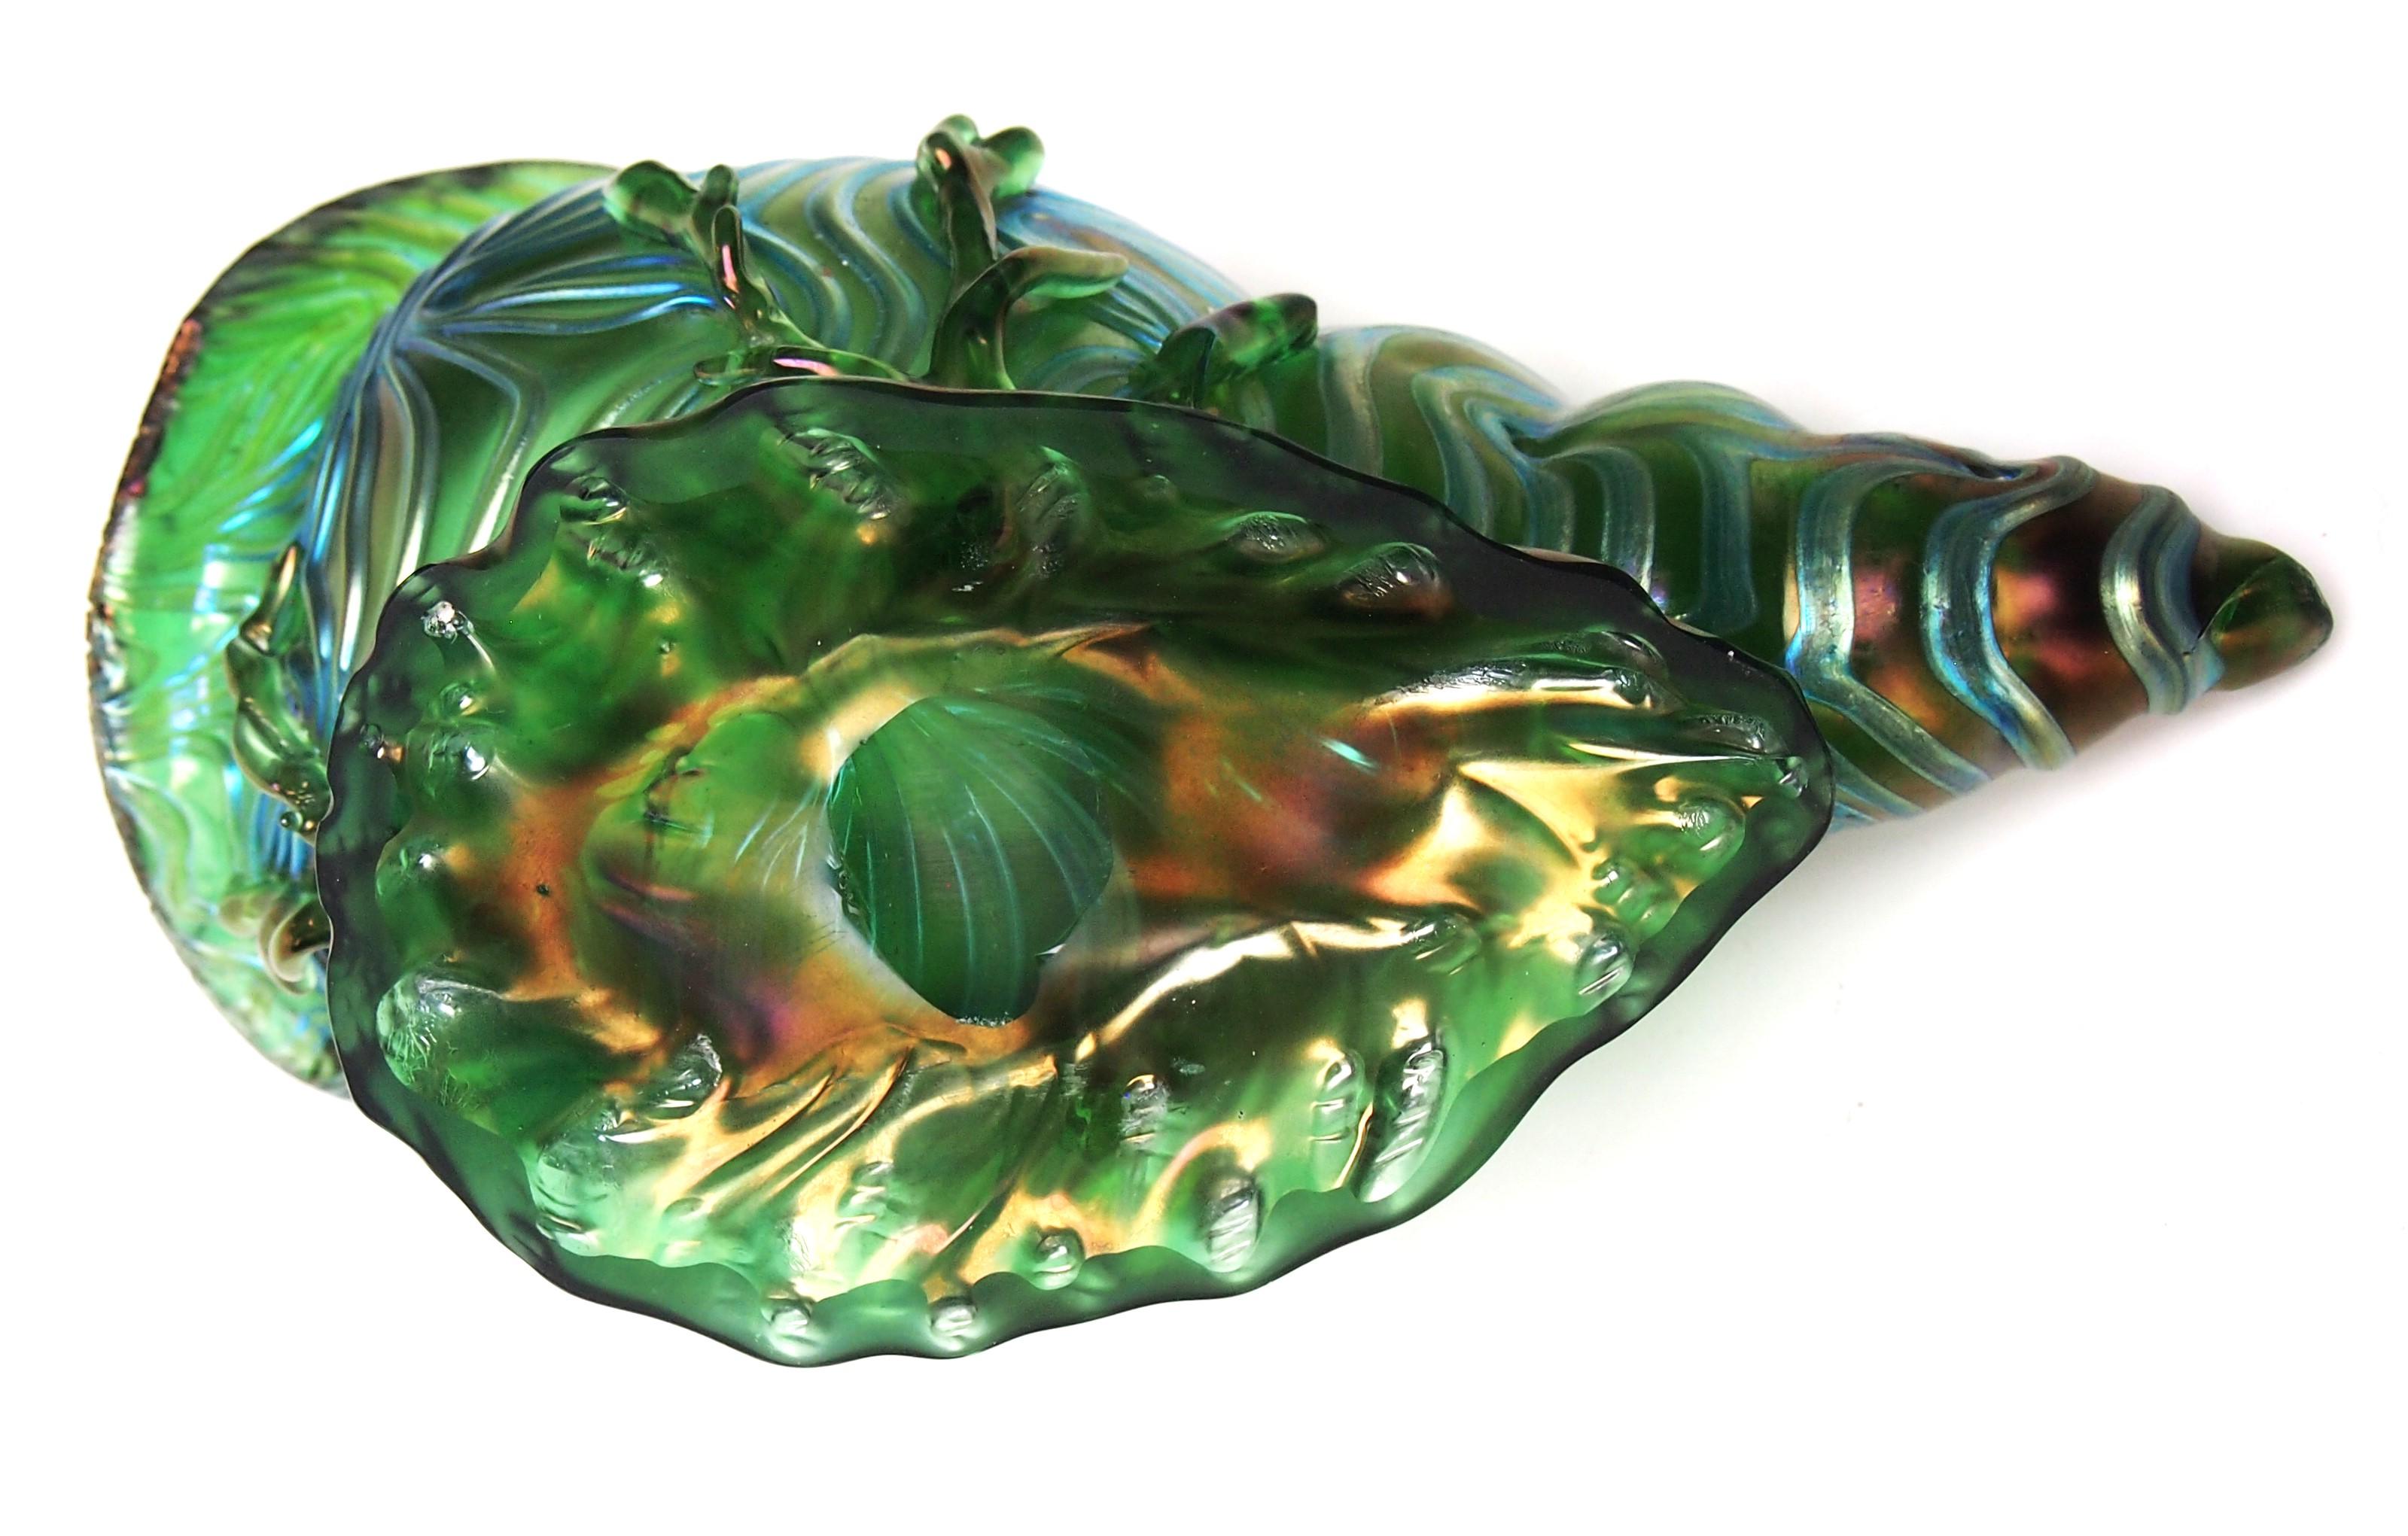 Stunning Loetz Crete Formosa Glass Seashell Vase in green and blue1902 For Sale 1